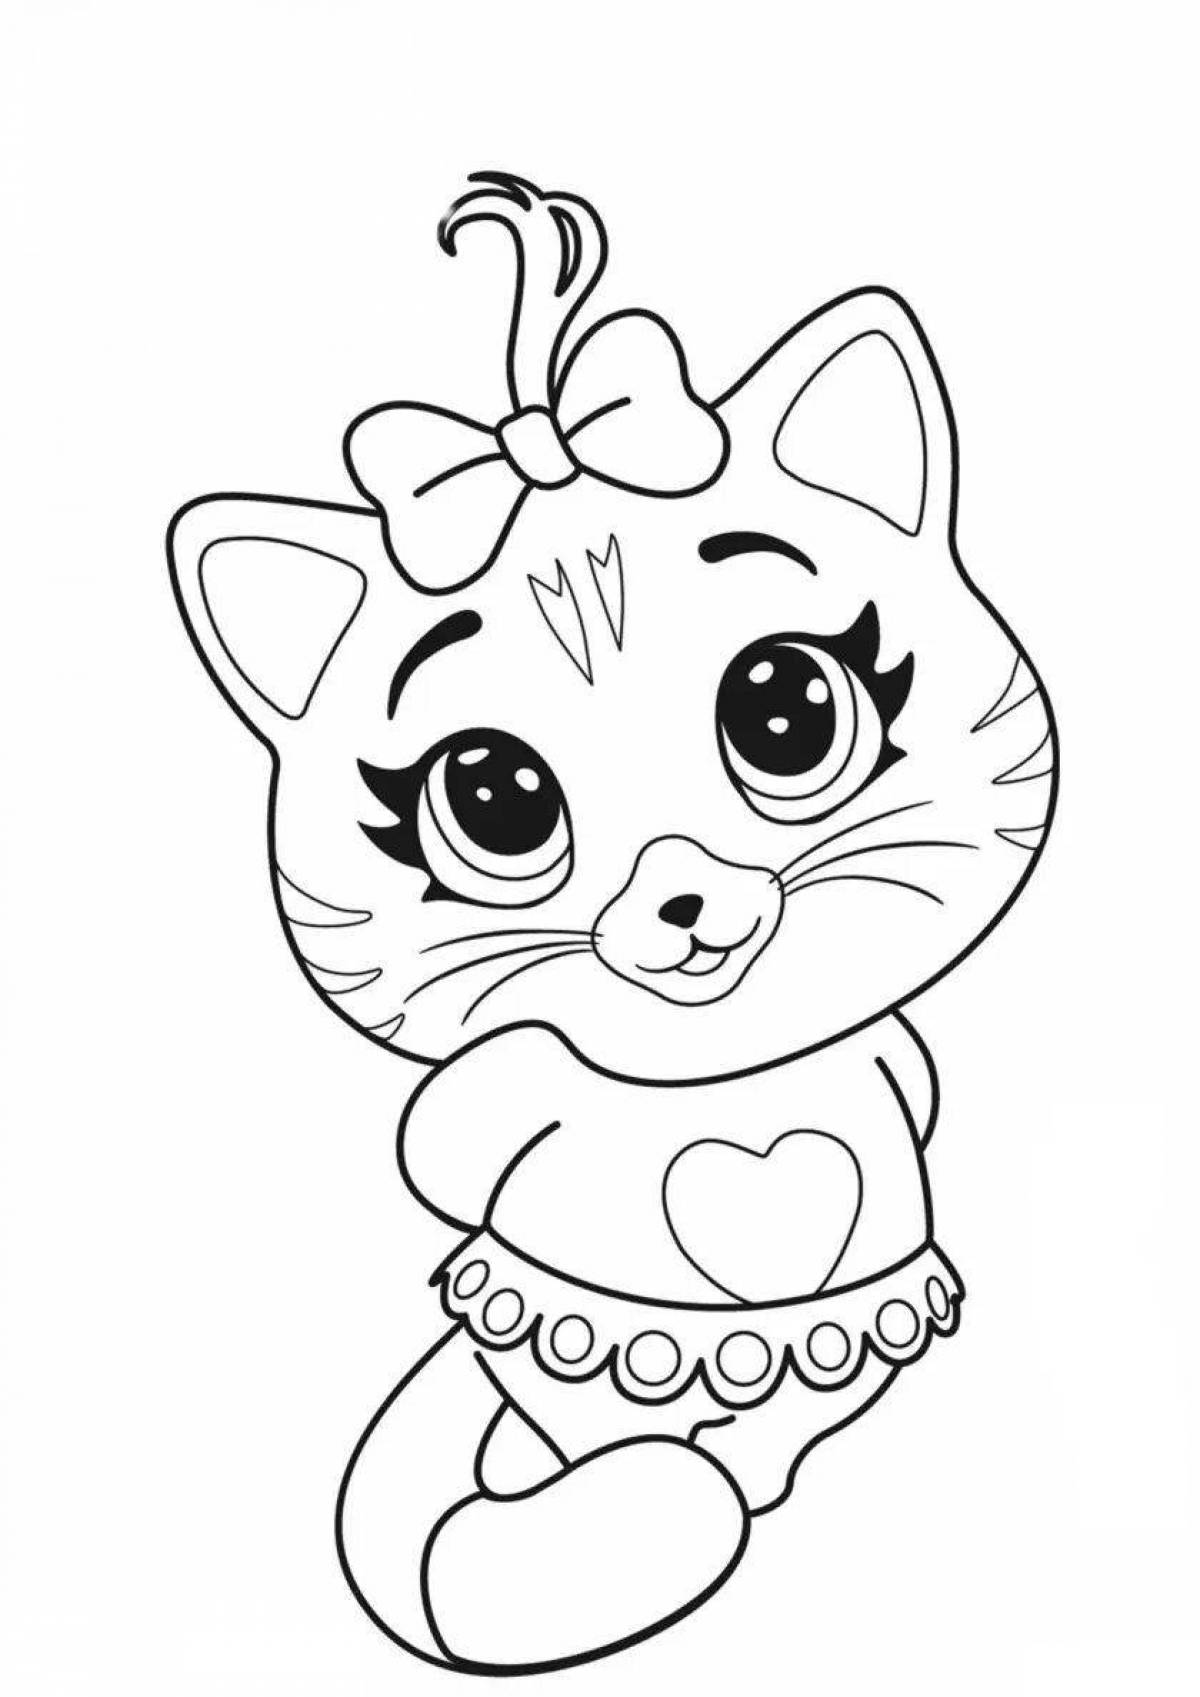 Snuggly cute cats coloring book for girls